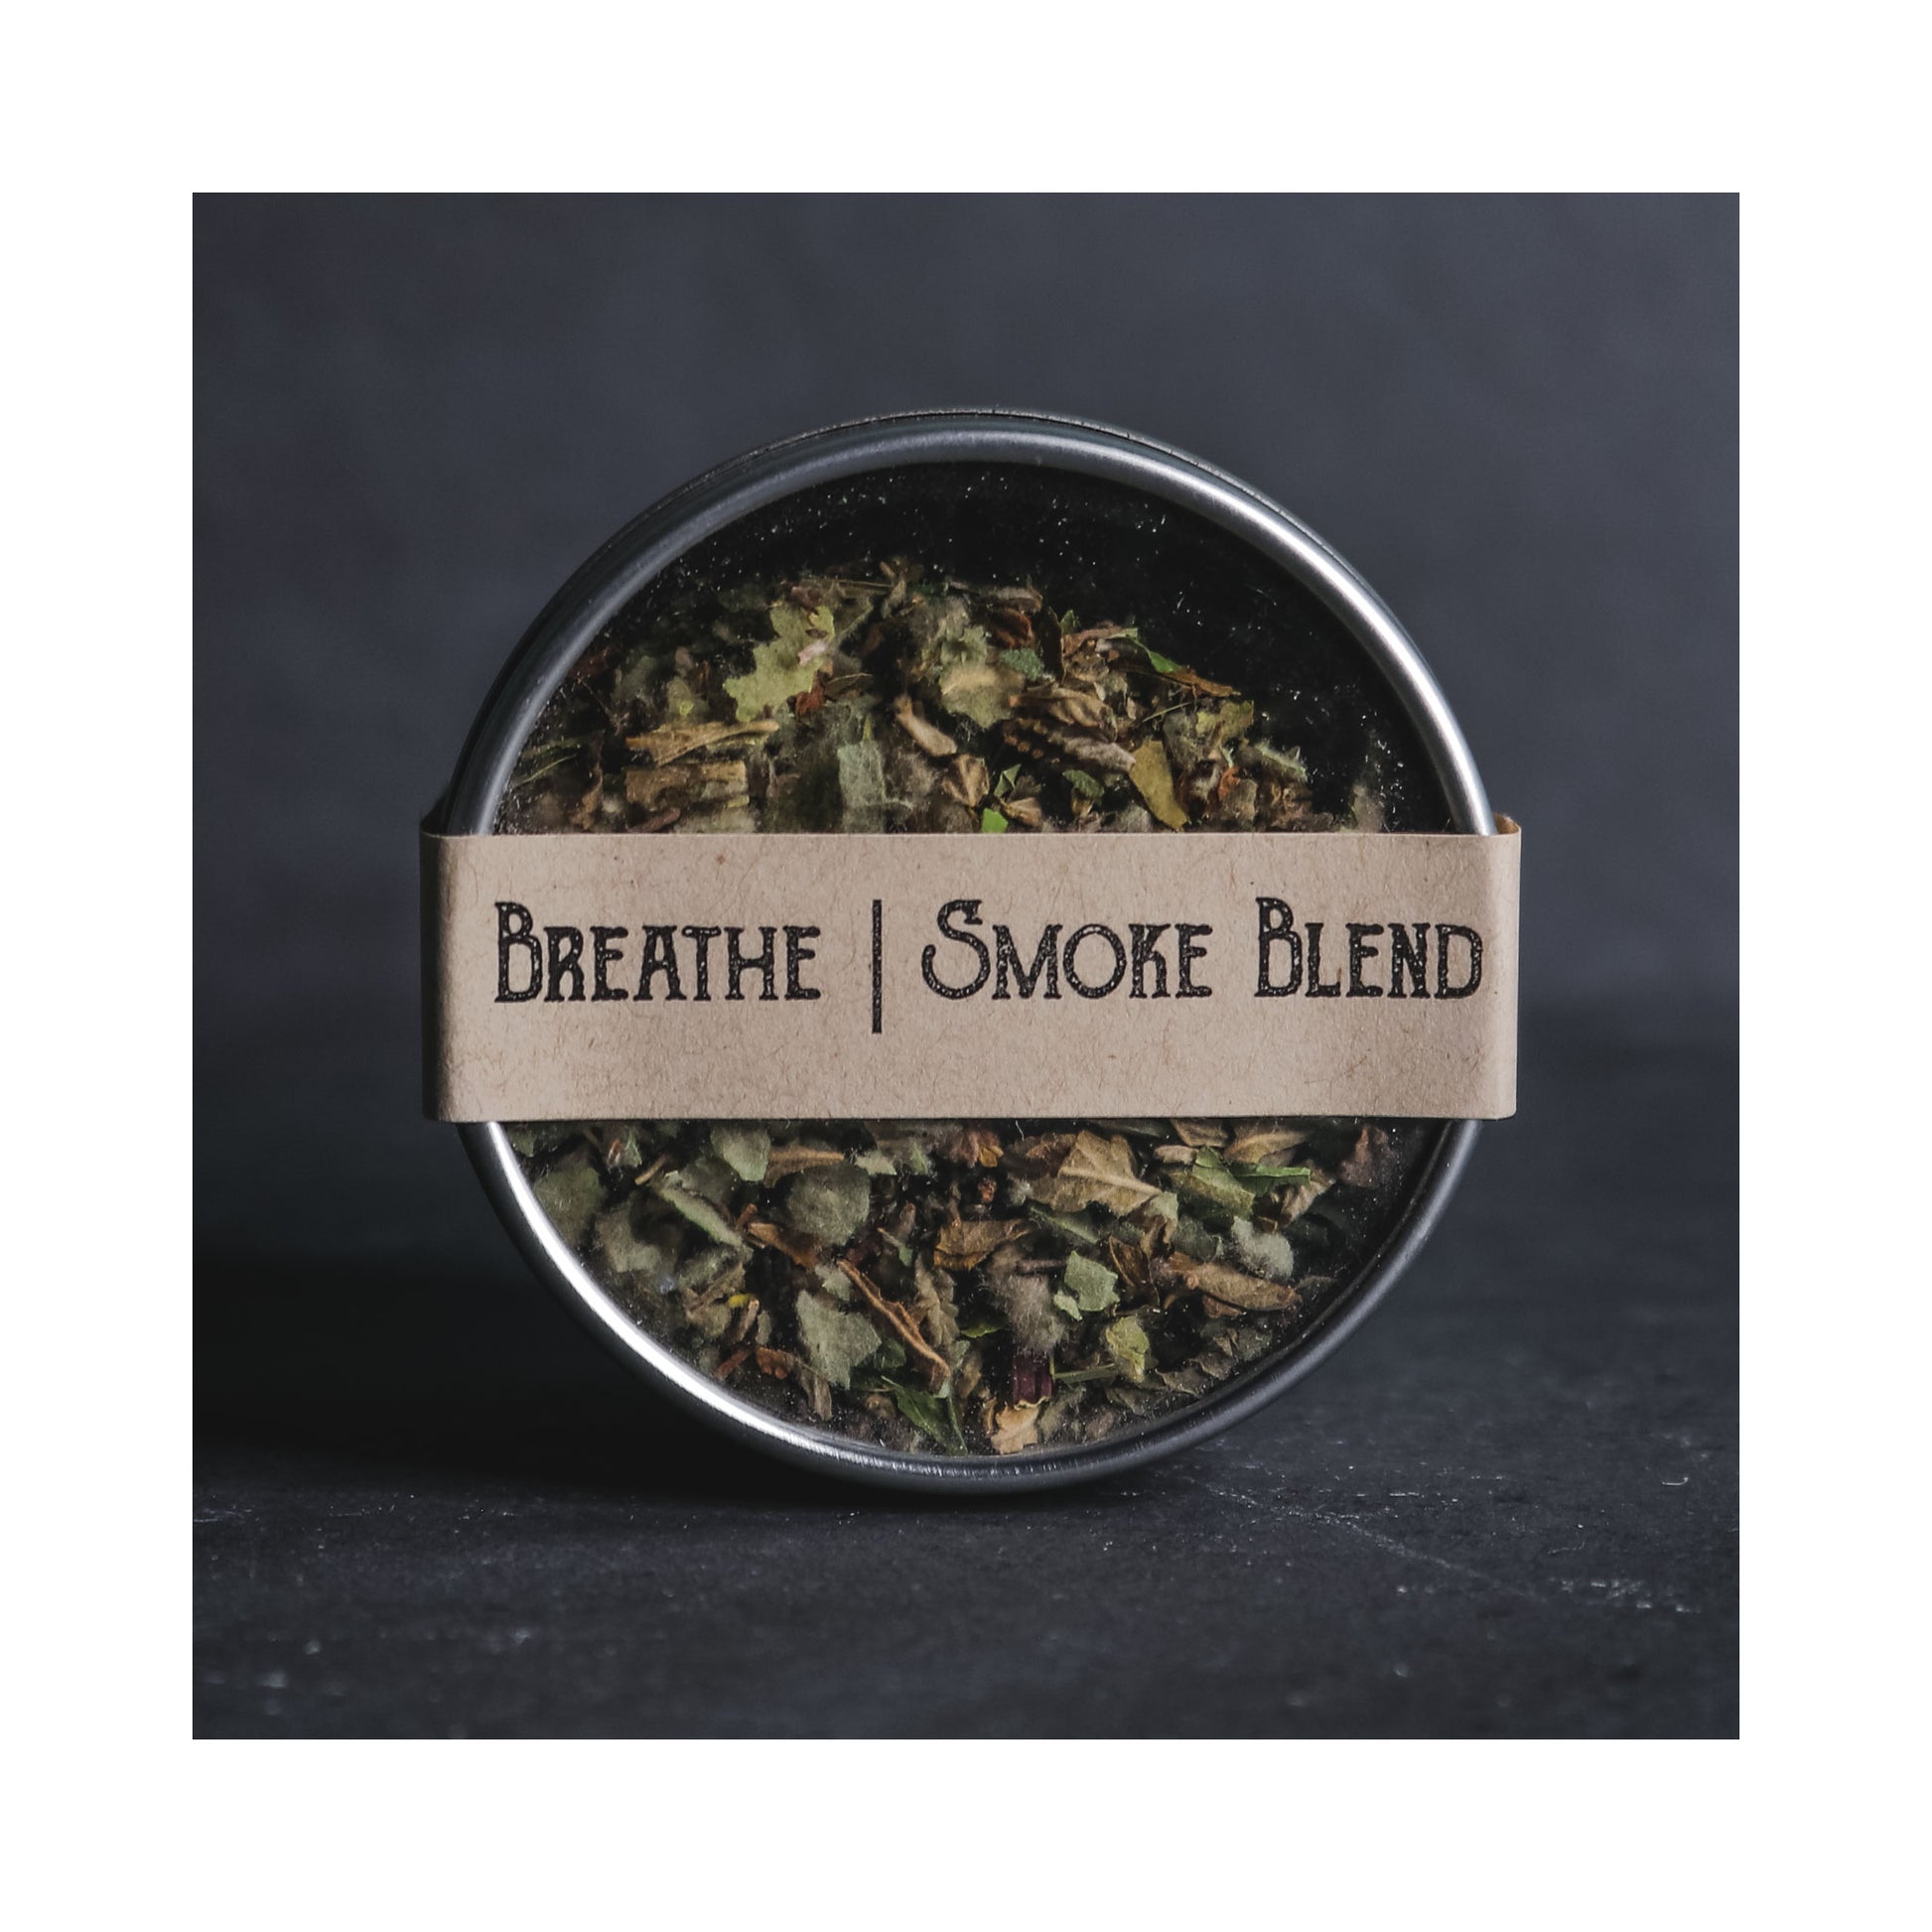 Breathe Tea & Smoke Blend with Top Quality Scents